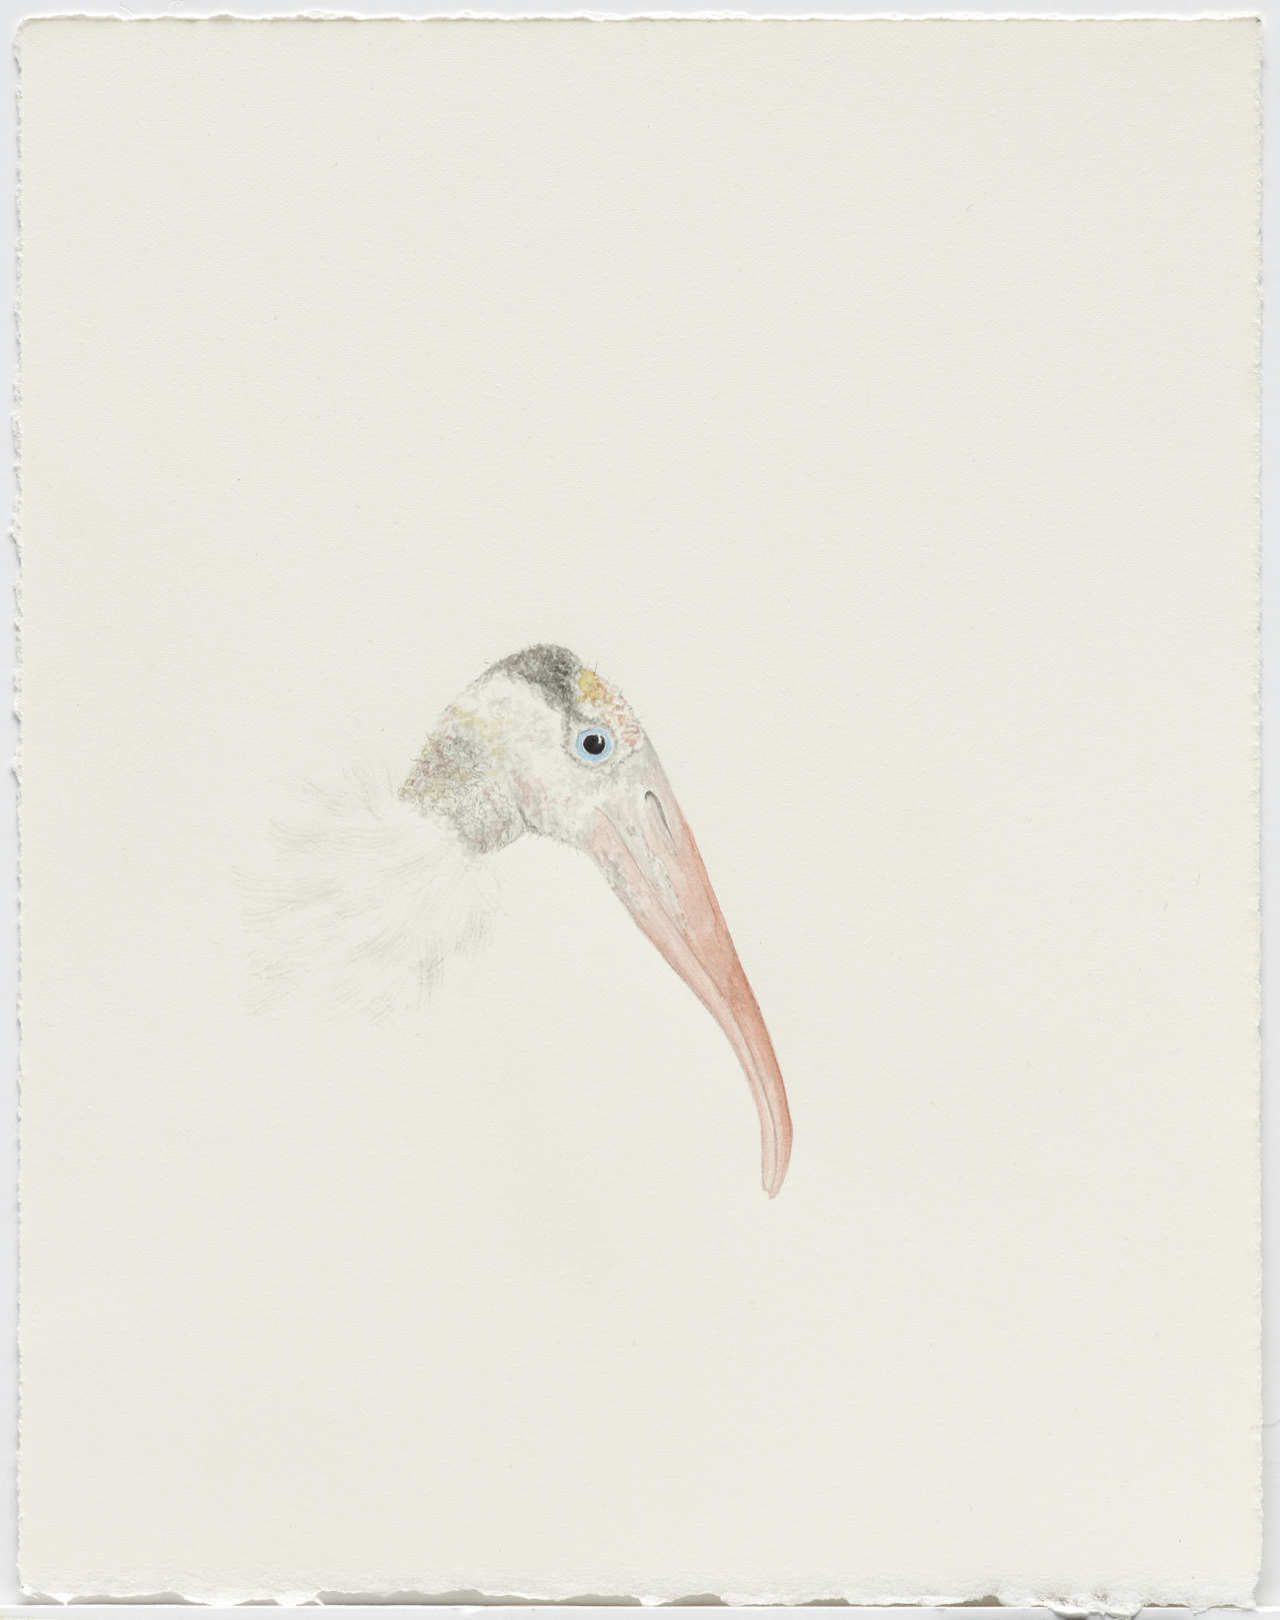 Cynthia Mulcahy, Wood Stork, Trinity River, Dallas from A Field Guide to Flora and Fauna of Southern Dallas public art project, 2018, watercolor, pencil and ink on Arches paper, 10.25 x 8 inches unframed, Photograph by Chad Redmon